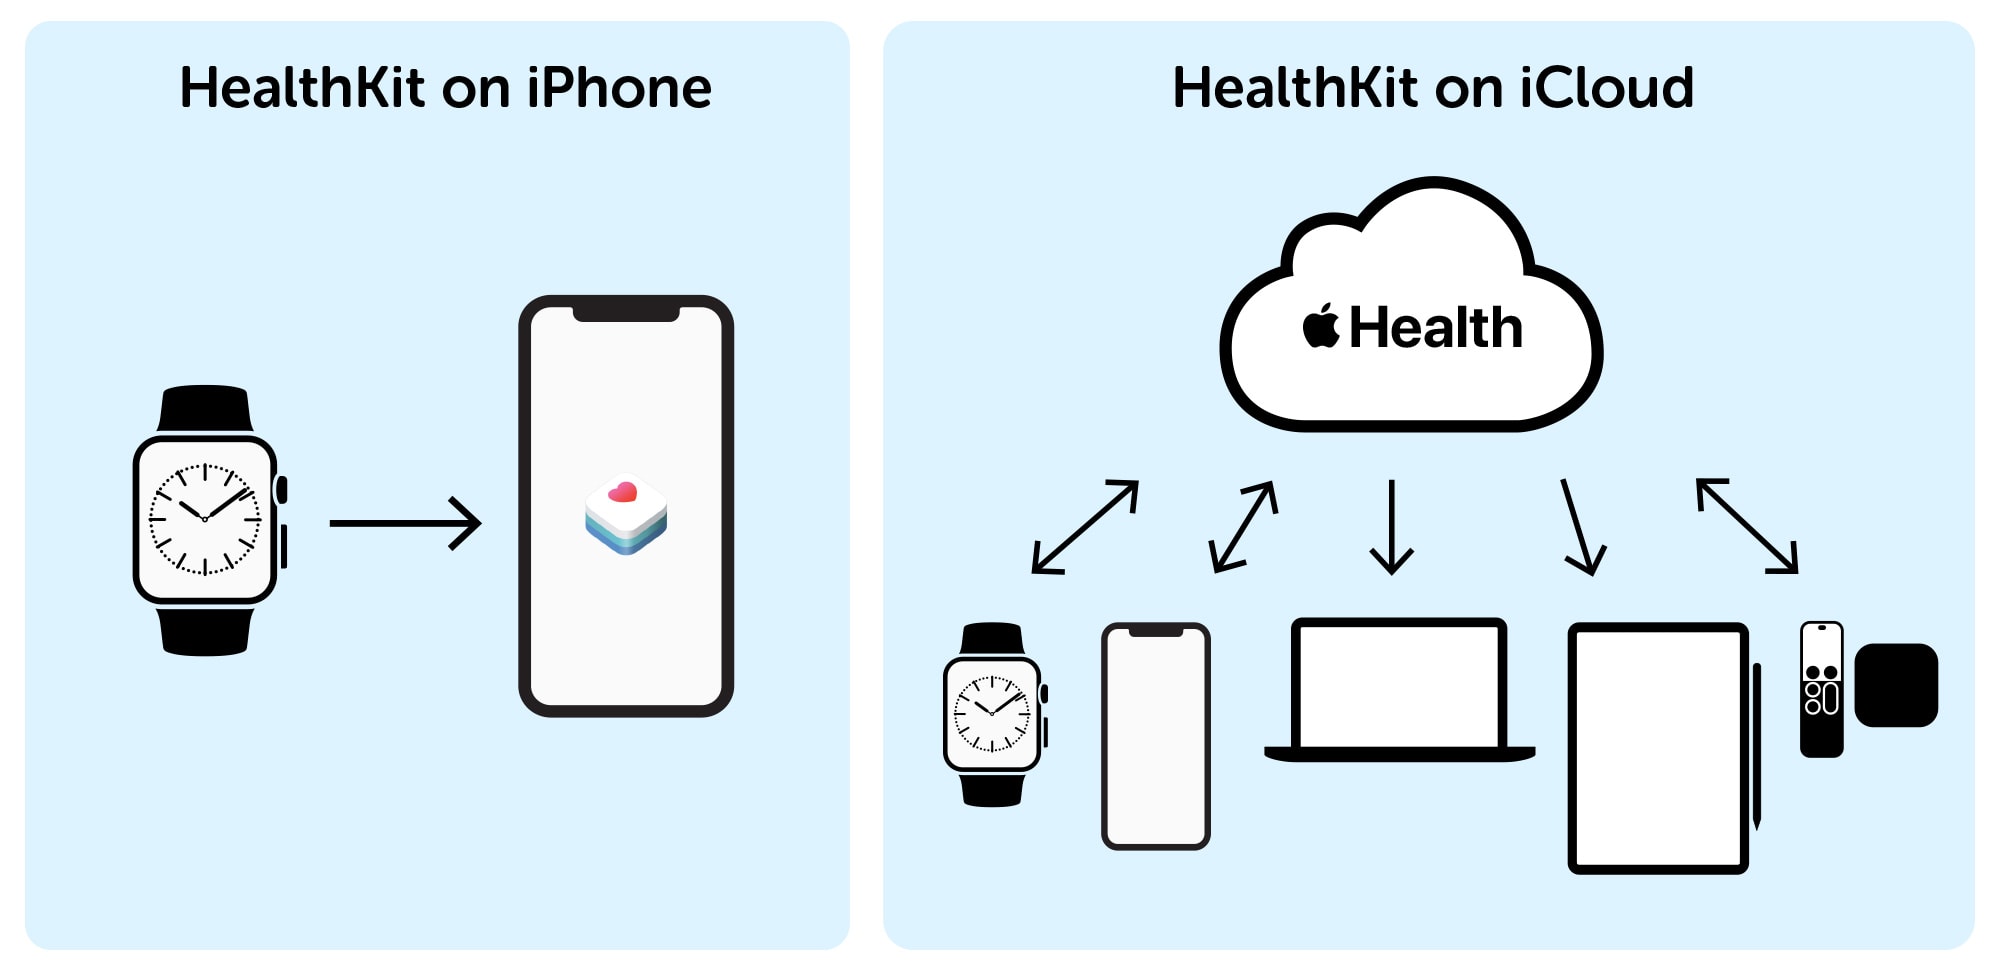 Why HealthKit needs to move to iCloud: Apple needs to free HealthKit from the iPhone.